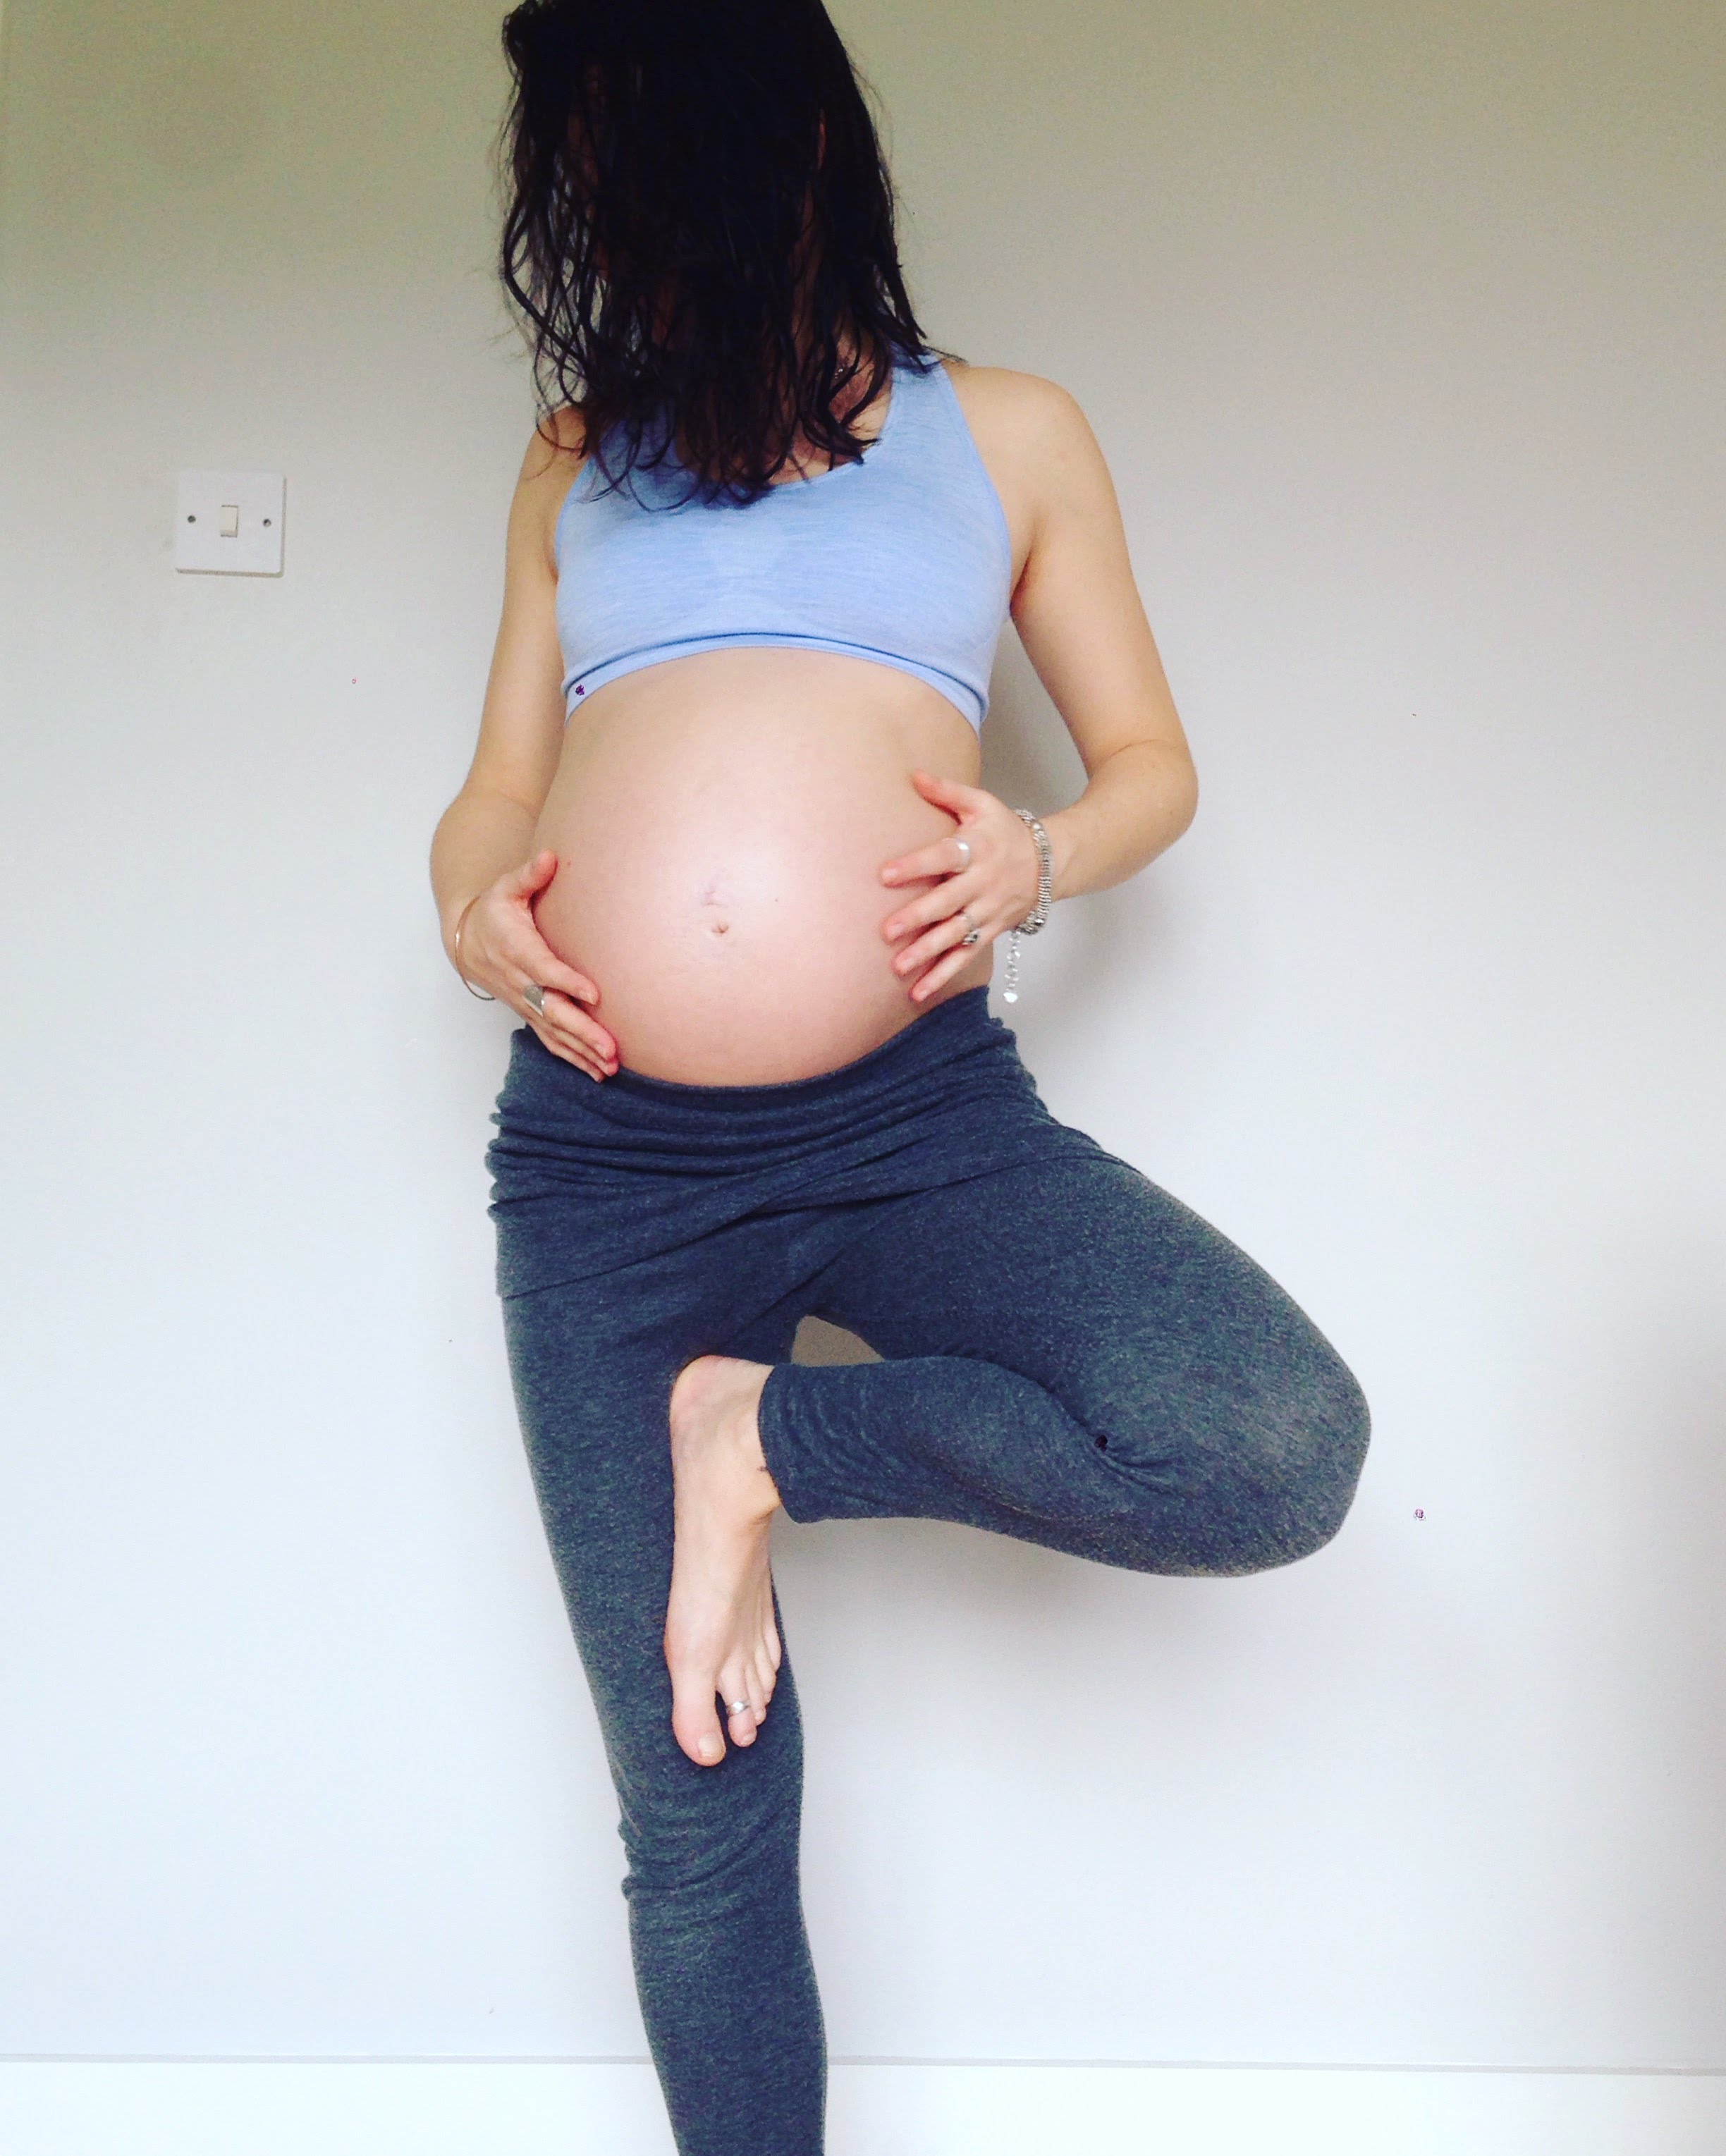 The Do’s And Don’ts of Yoga When Pregnant